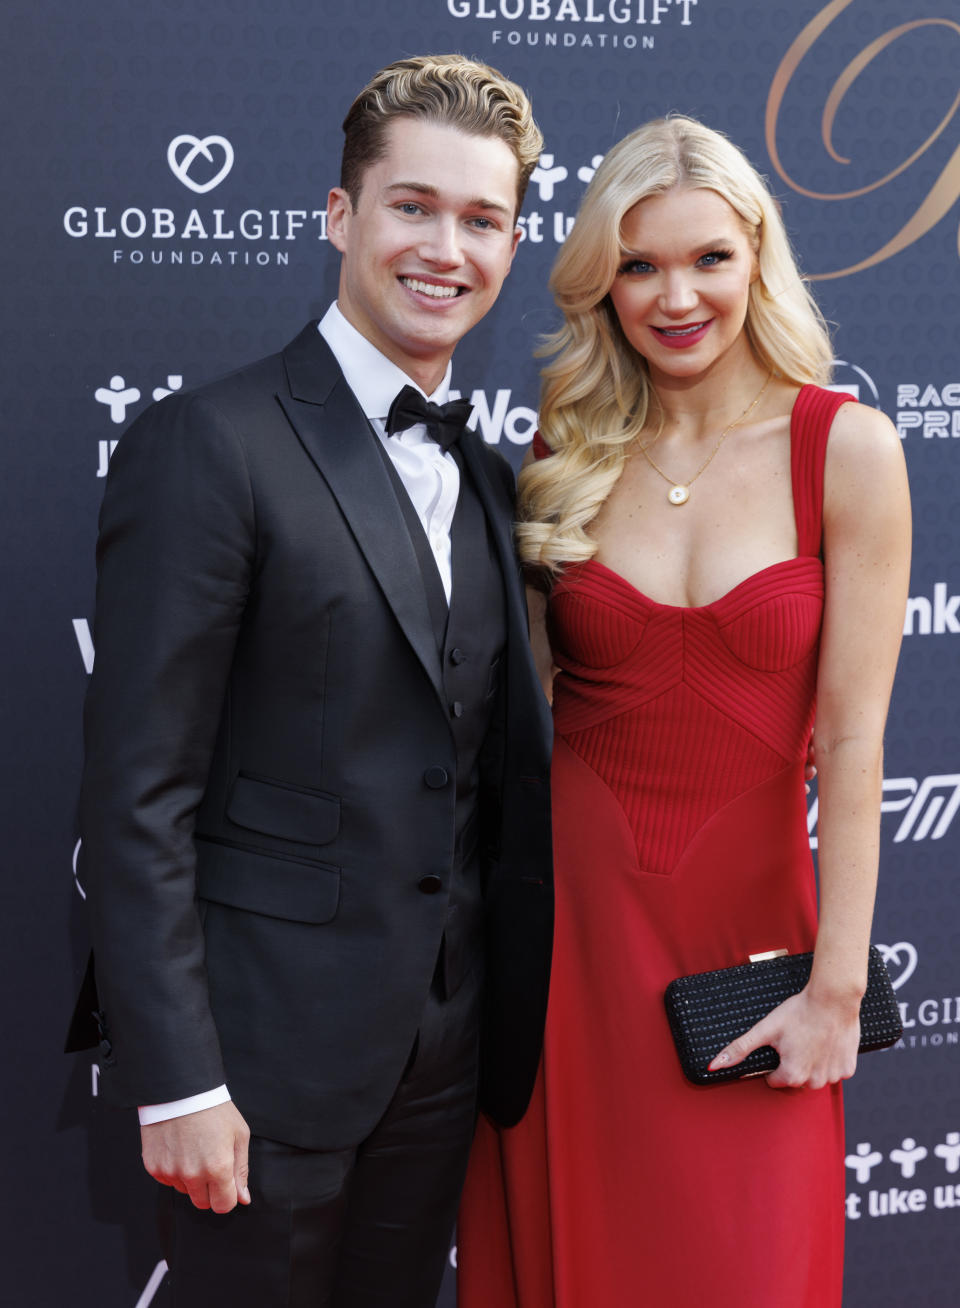 LONDON, ENGLAND - JUNE 29: AJ Pritchard and Abbie Quinnen attend the 12th annual Grand Prix Ball in aid of the Global Gift Foundation, at The Hurlingham Club on June 29, 2022 in London, England. (Photo by John Phillips/Getty Images)